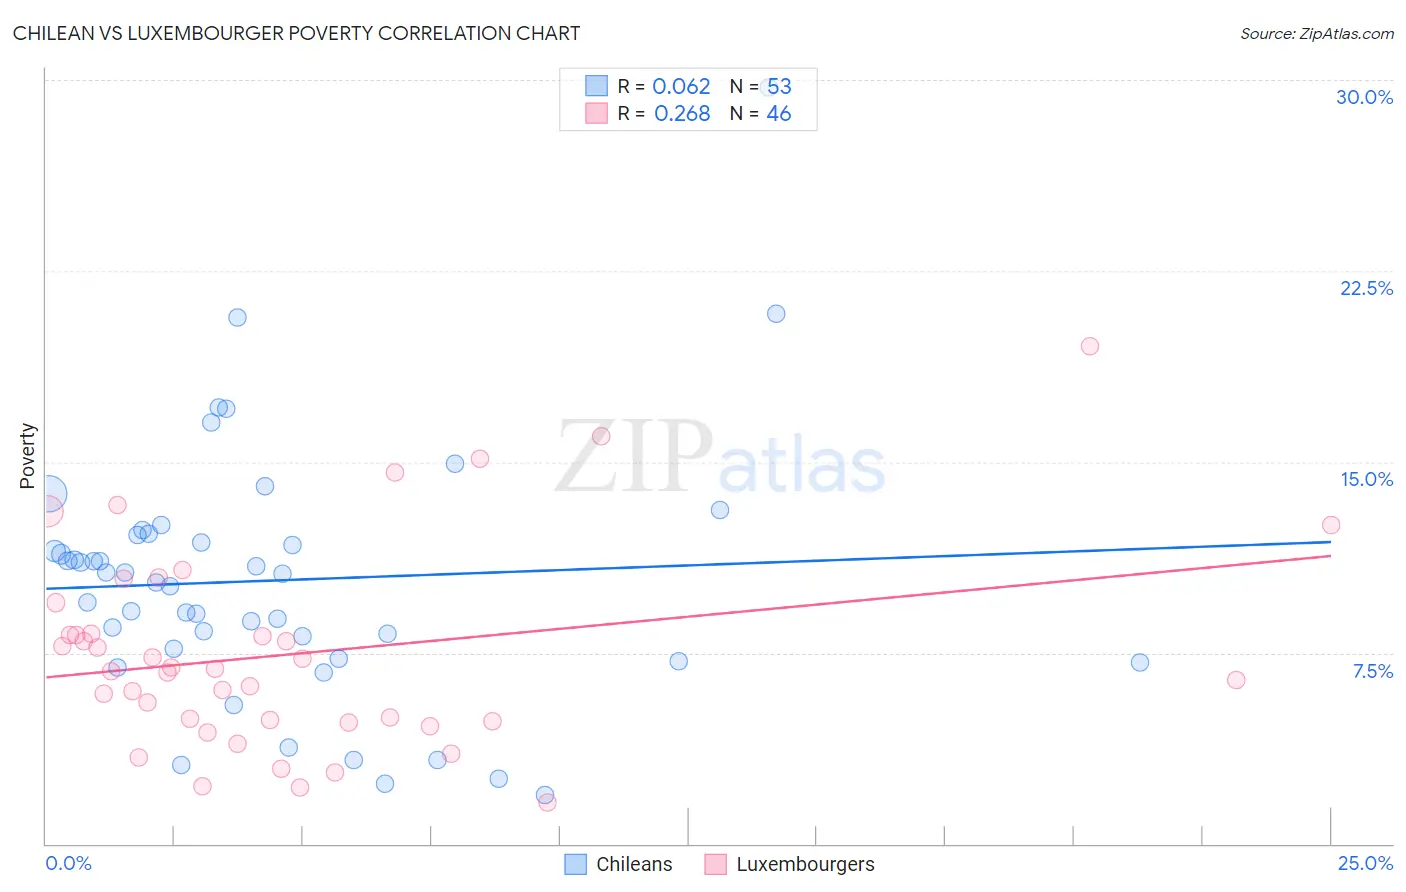 Chilean vs Luxembourger Poverty